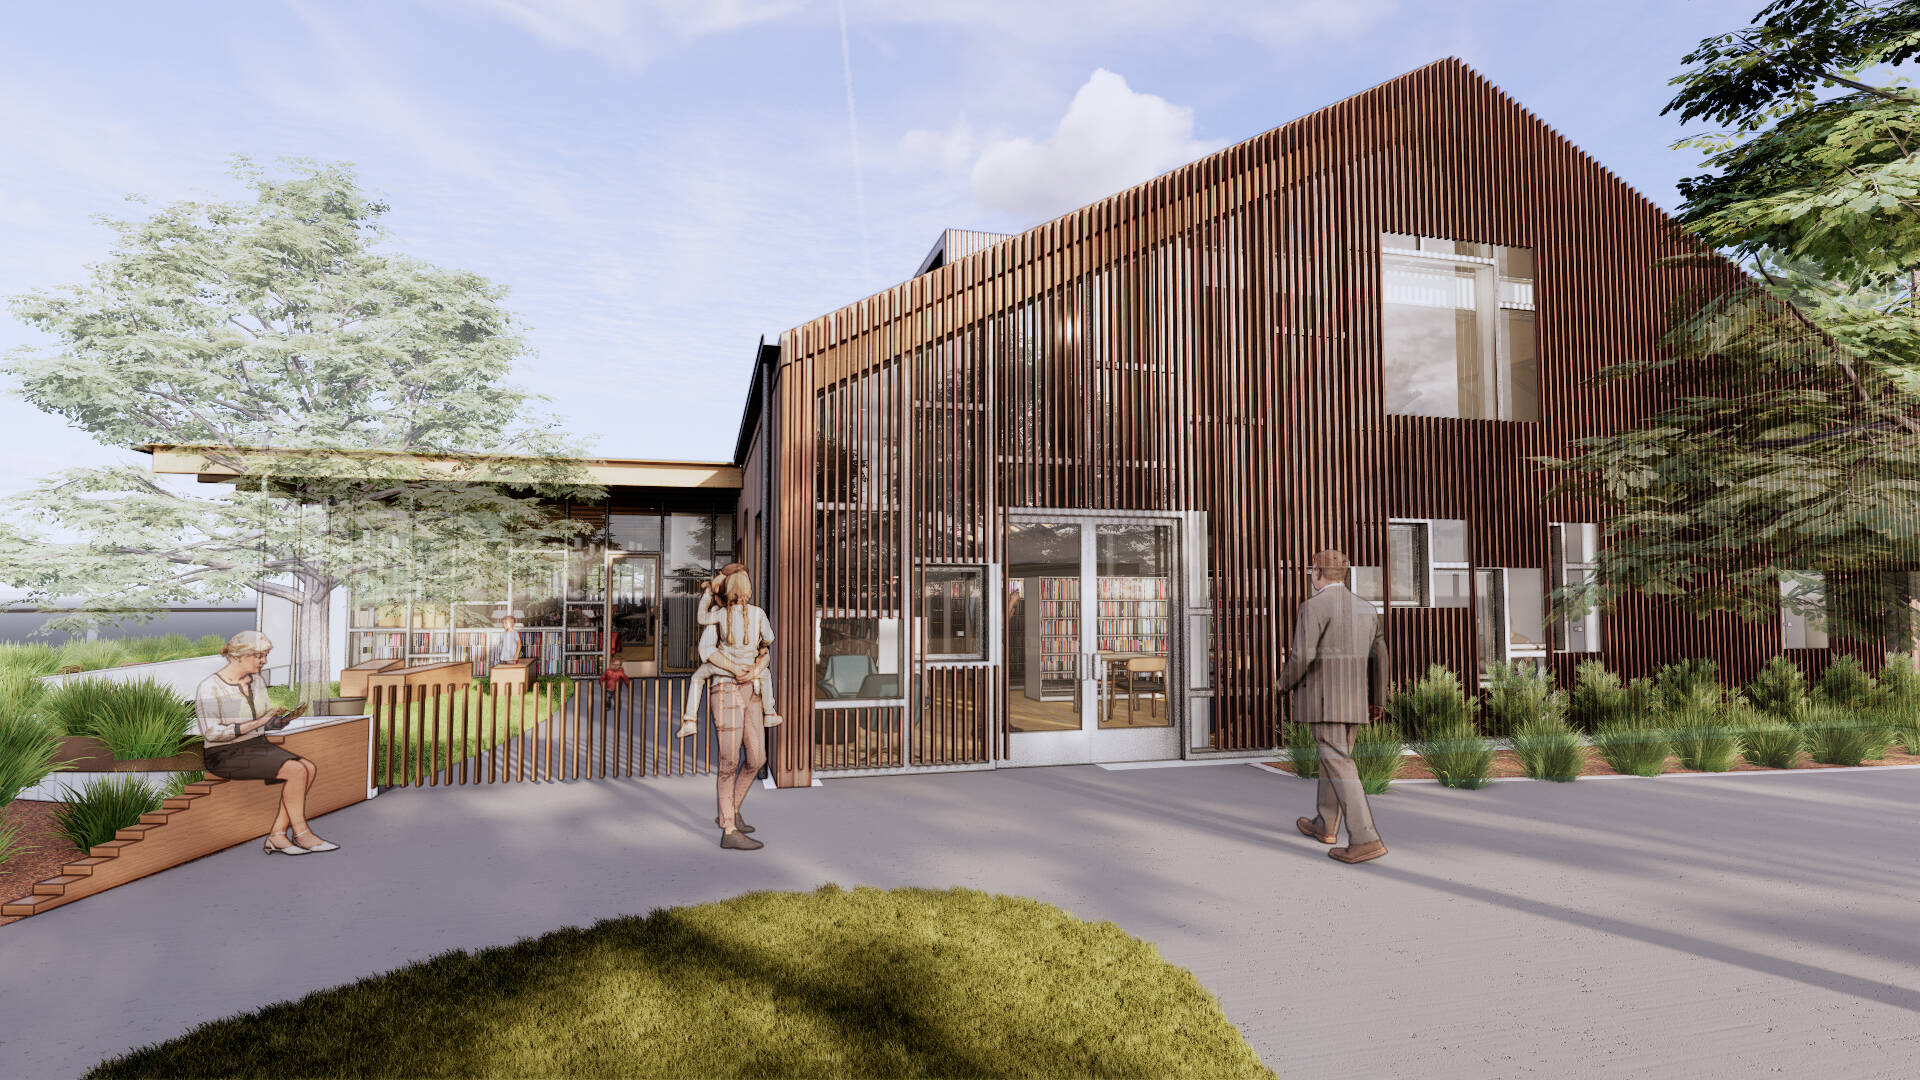 The Outdoor Play Area at the soon-to-be-renovated Sequim Library — accessed through a gate on the building’s east side and the interior Children’s Area — will be named in memory of Dorothy DeLand. (Graphic courtesy of North Olympic Library System)